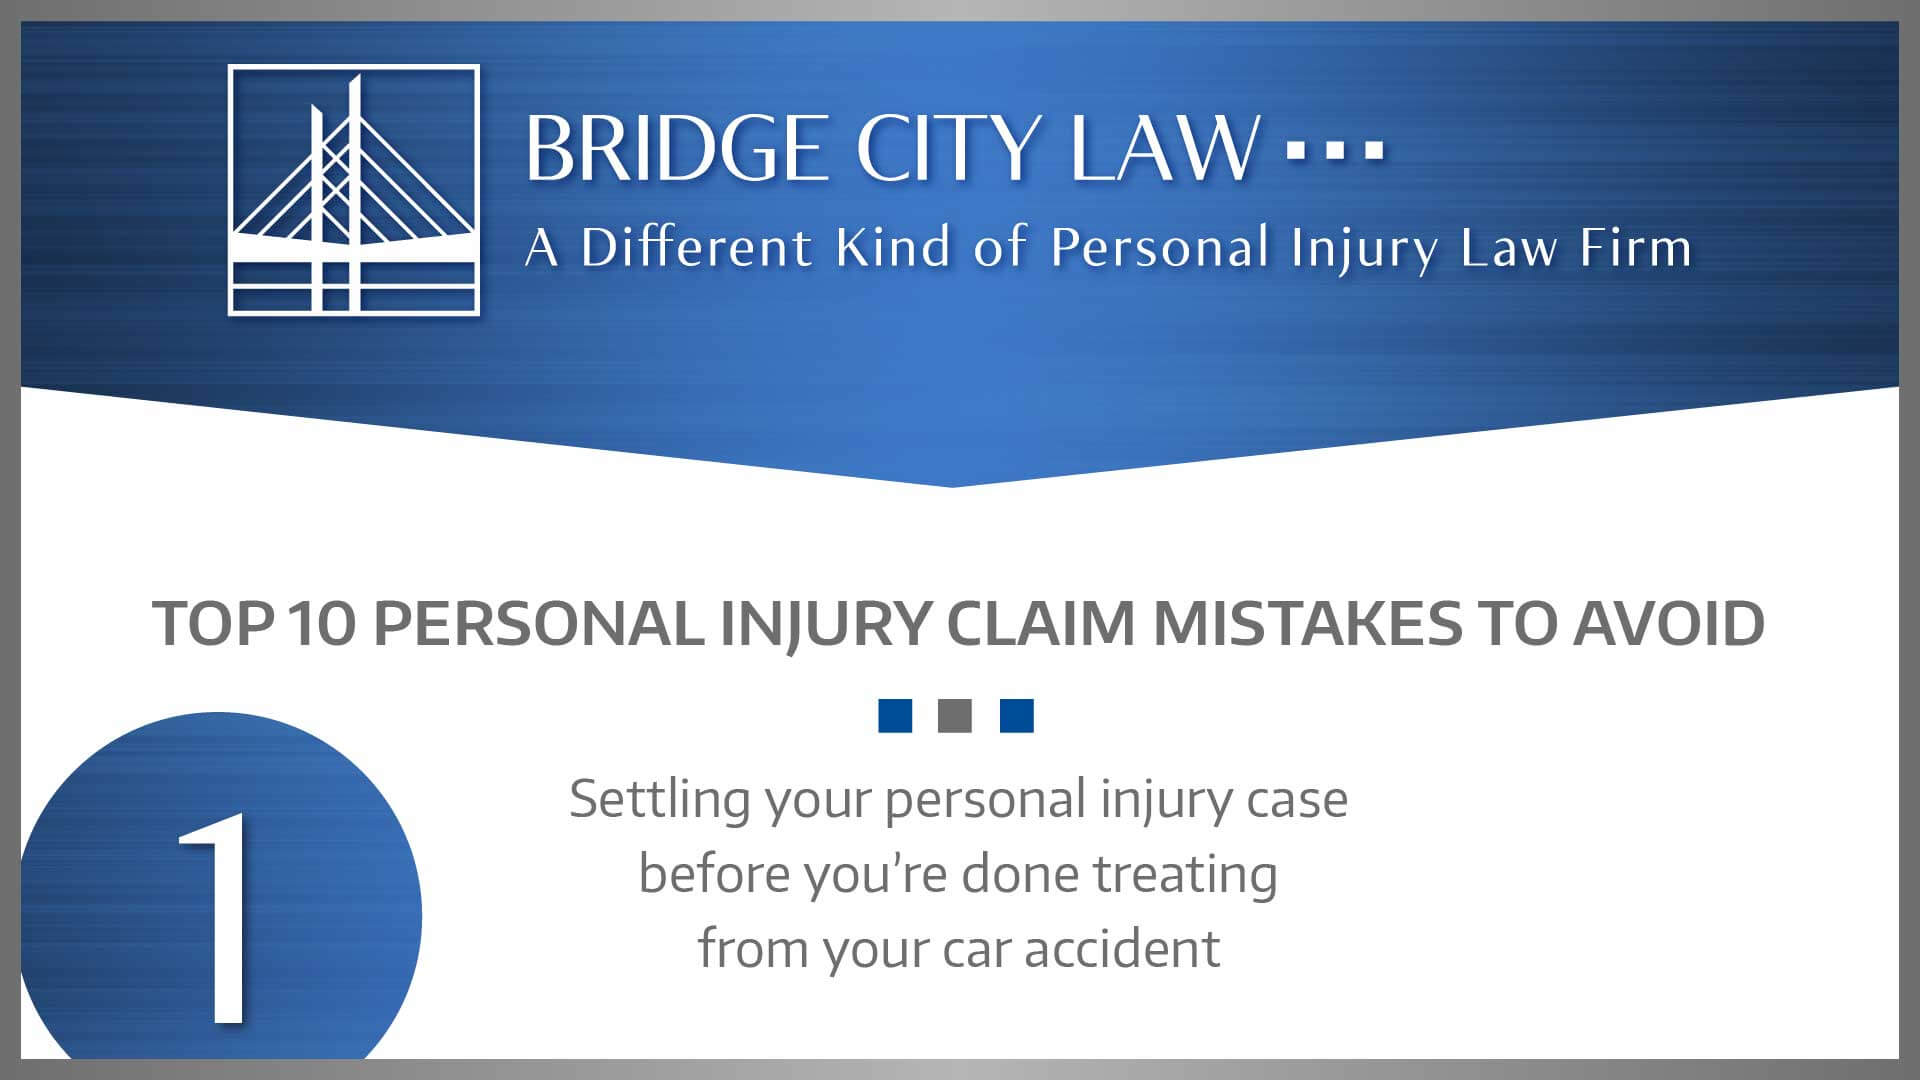 #1 MISTAKE: Settling your personal injury case before you’re done treating from your car accident.